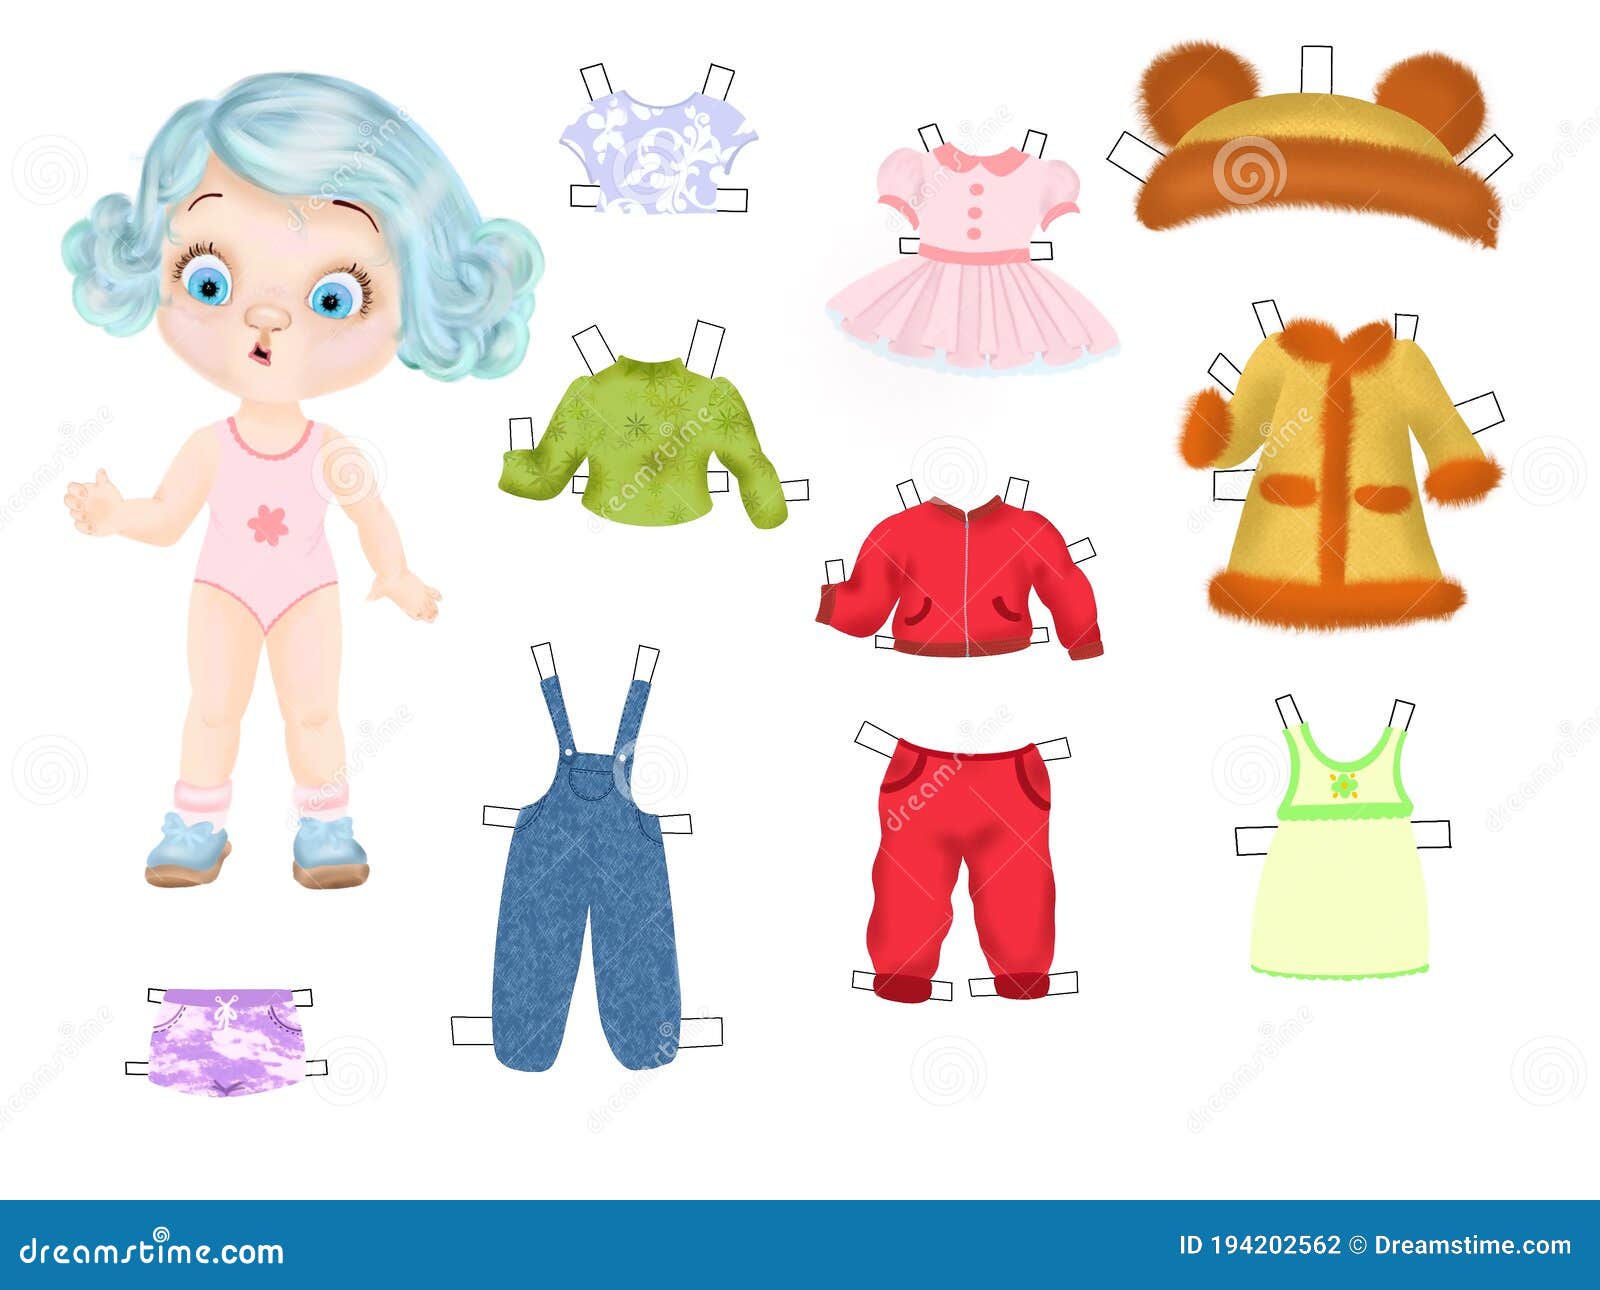 Paper doll with clothes stock illustration. Illustration of nice ...